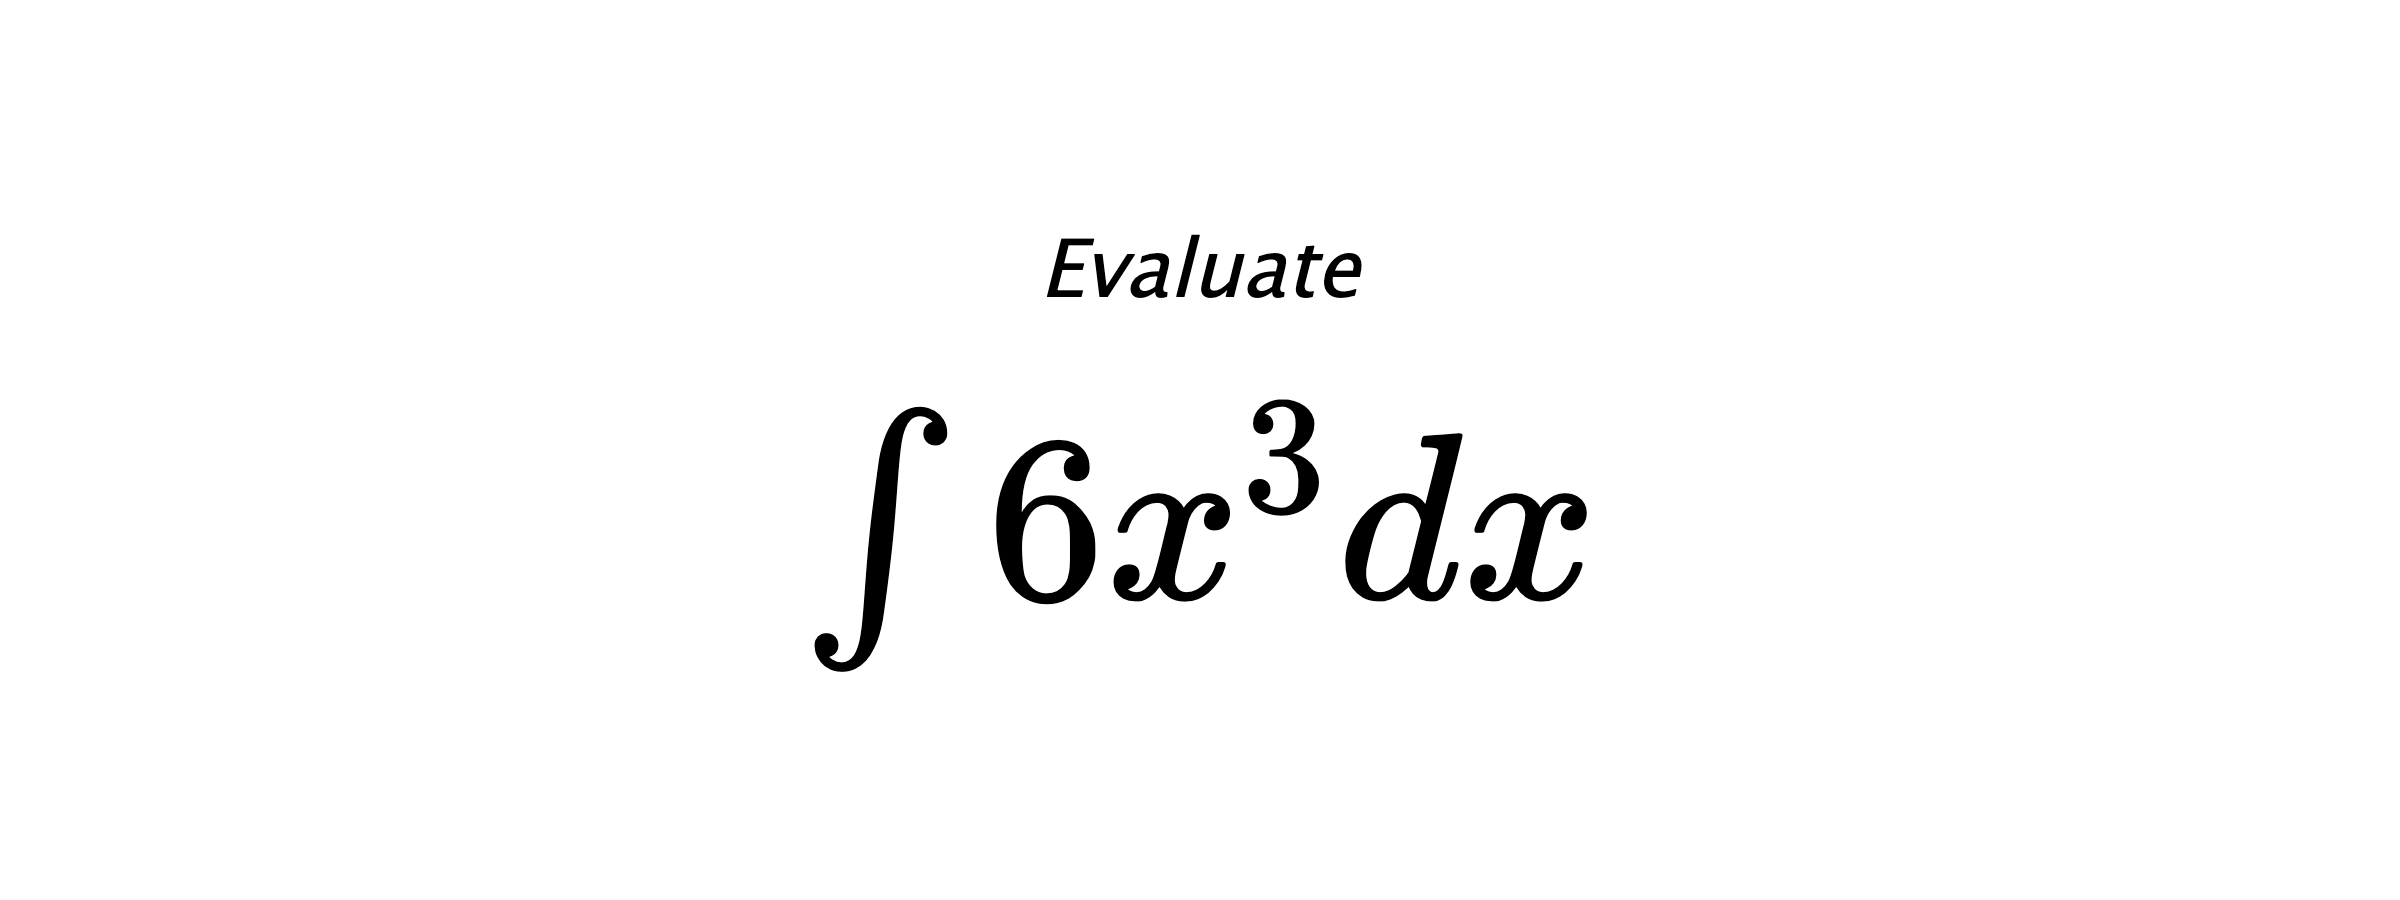 Evaluate $ \int 6 x^{3} dx $